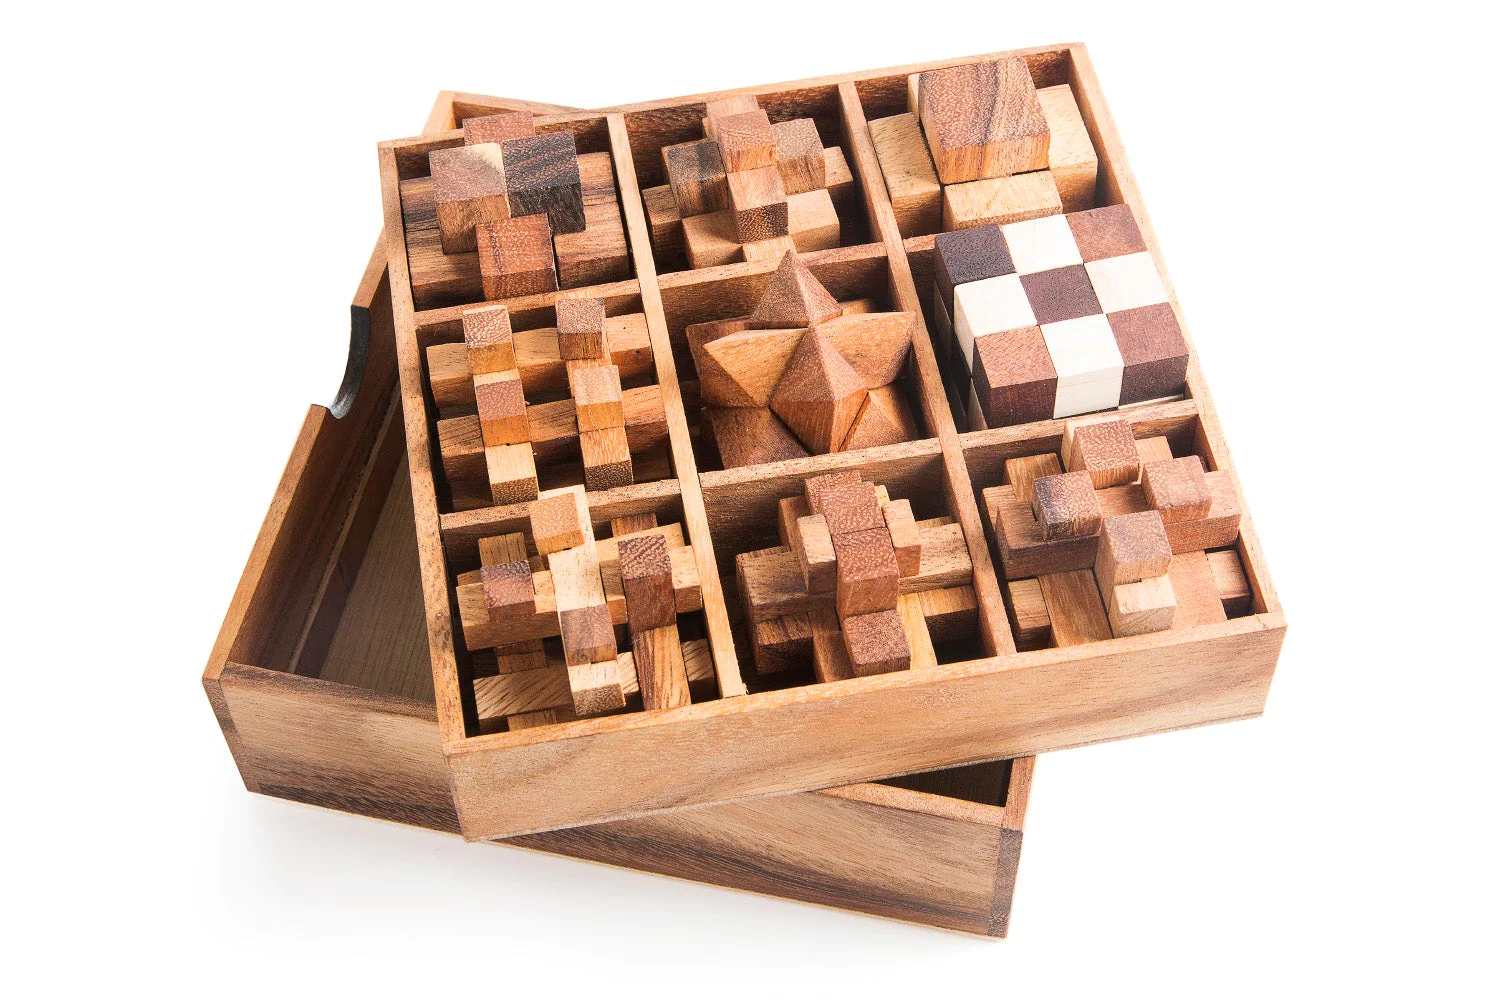 How do you open a wooden puzzle gift box?